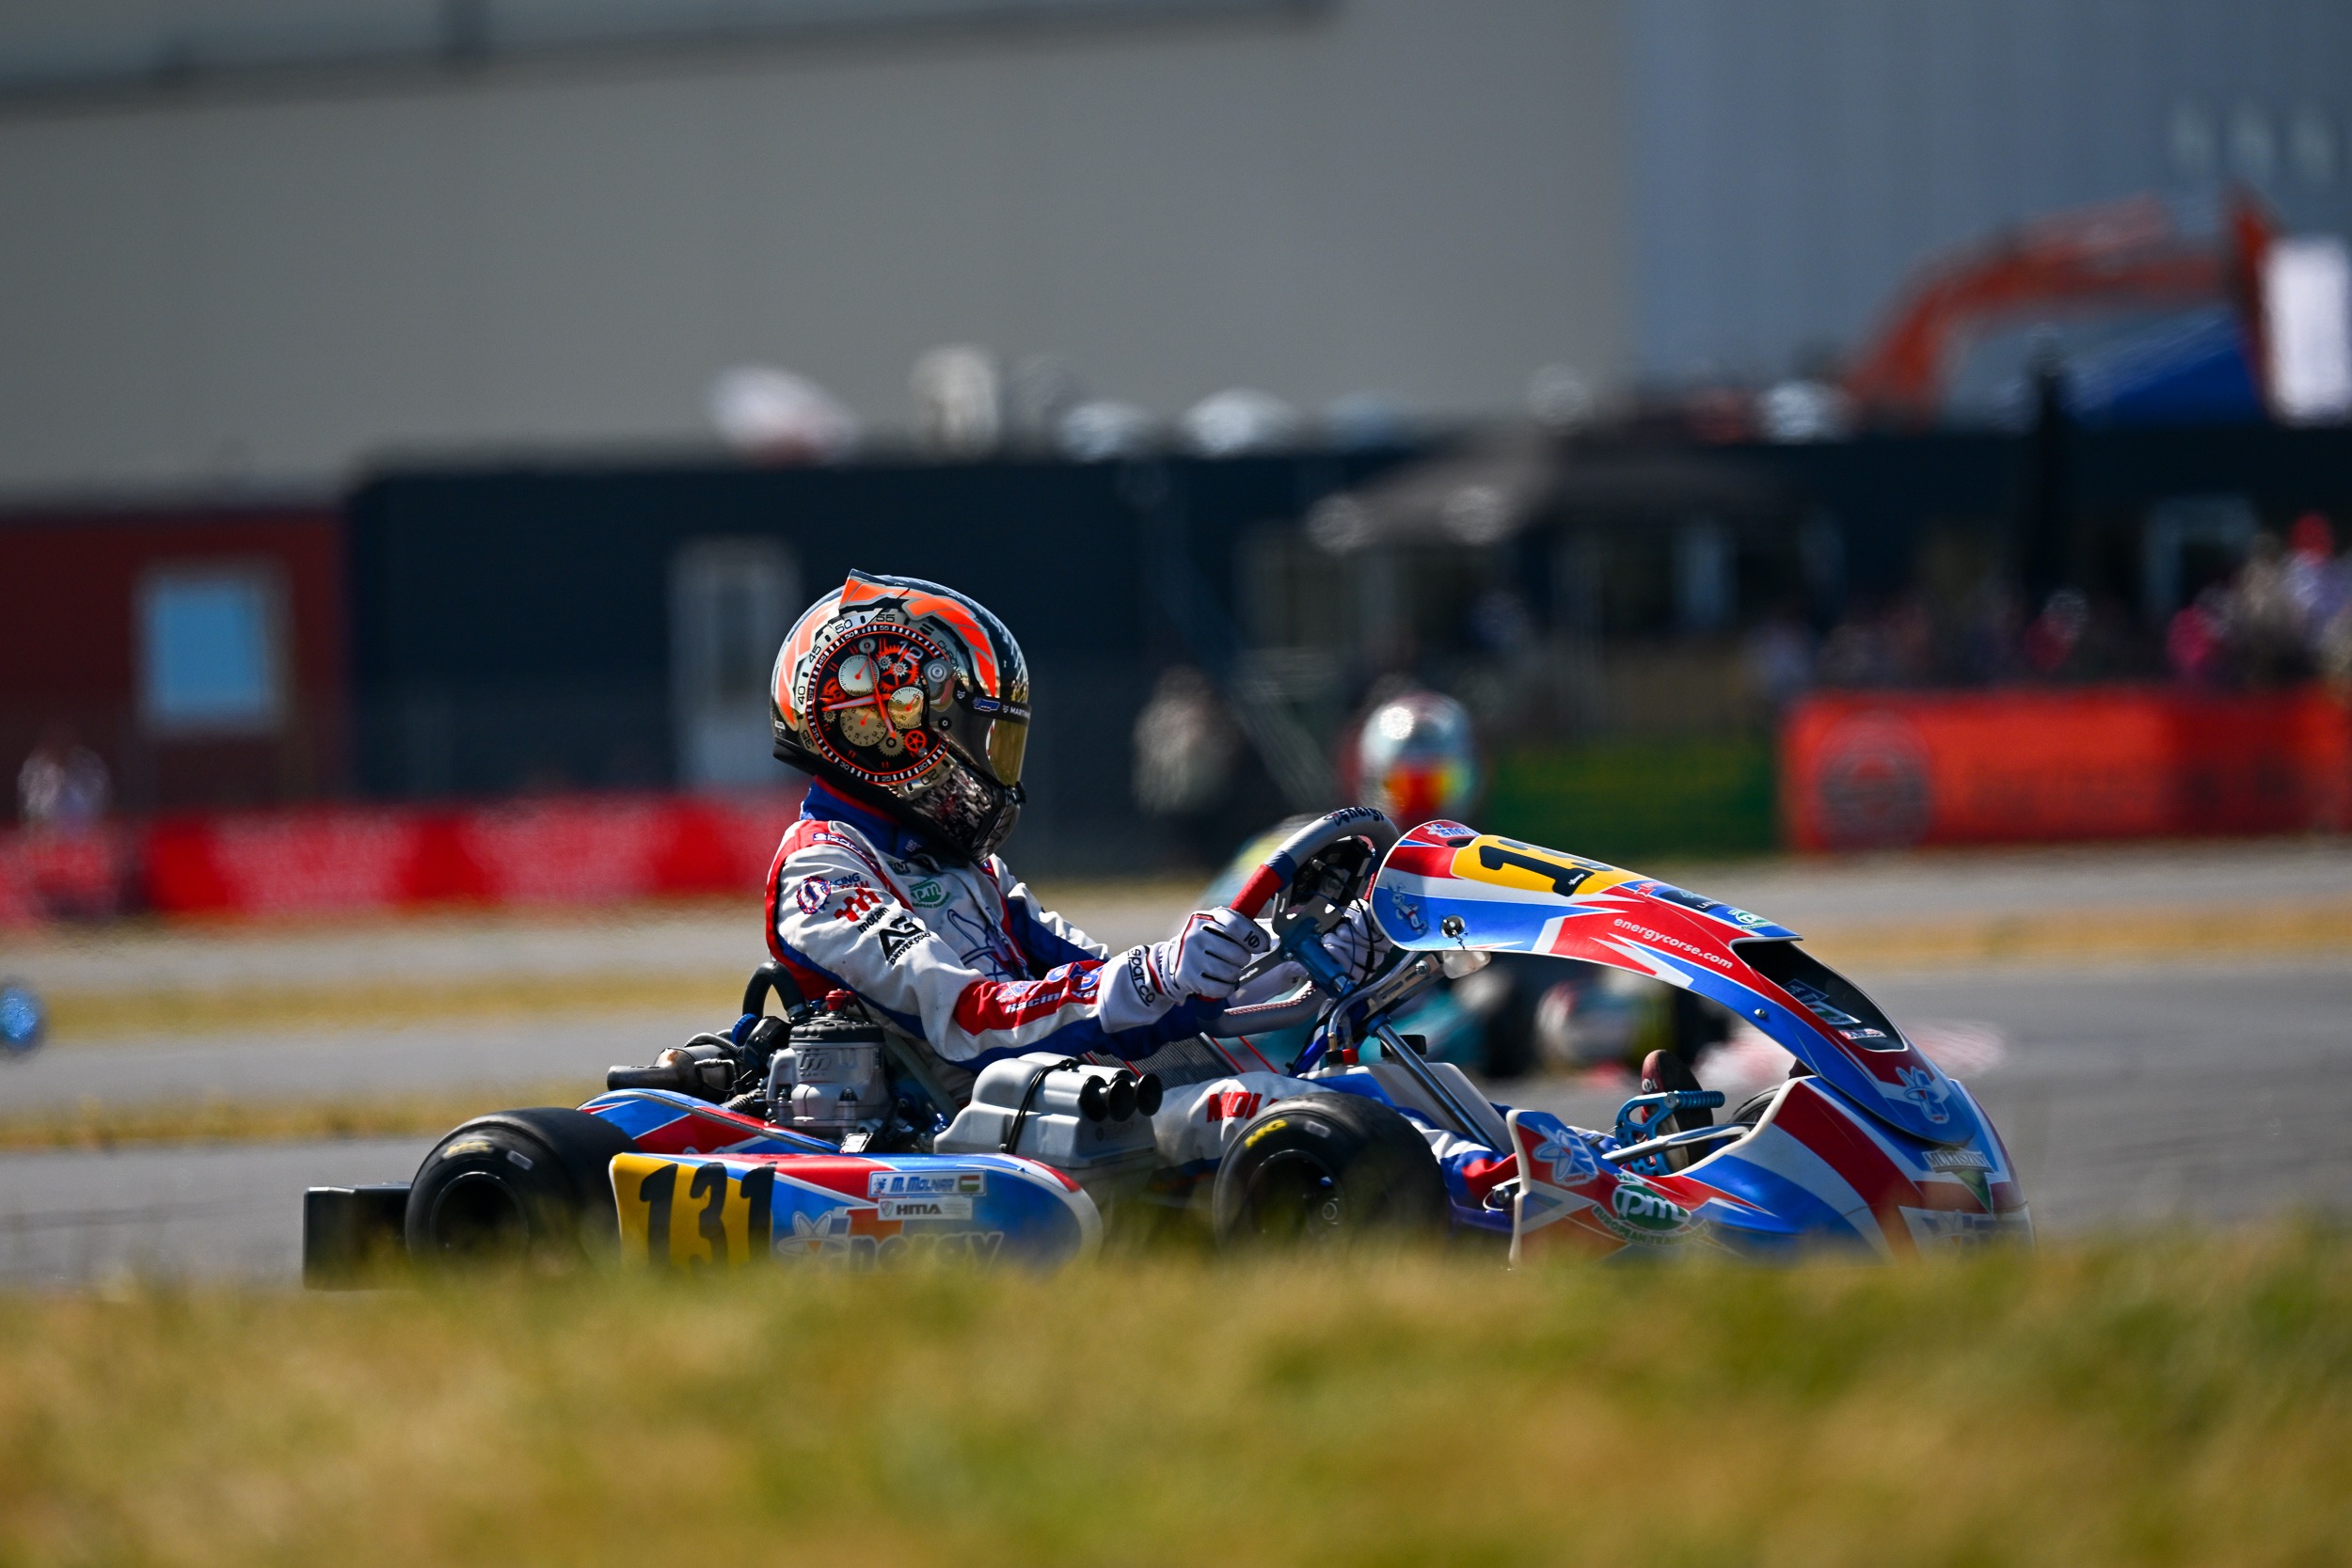 He showed good pace, but Martin Molnár’s European Championship in Denmark ended with a crash